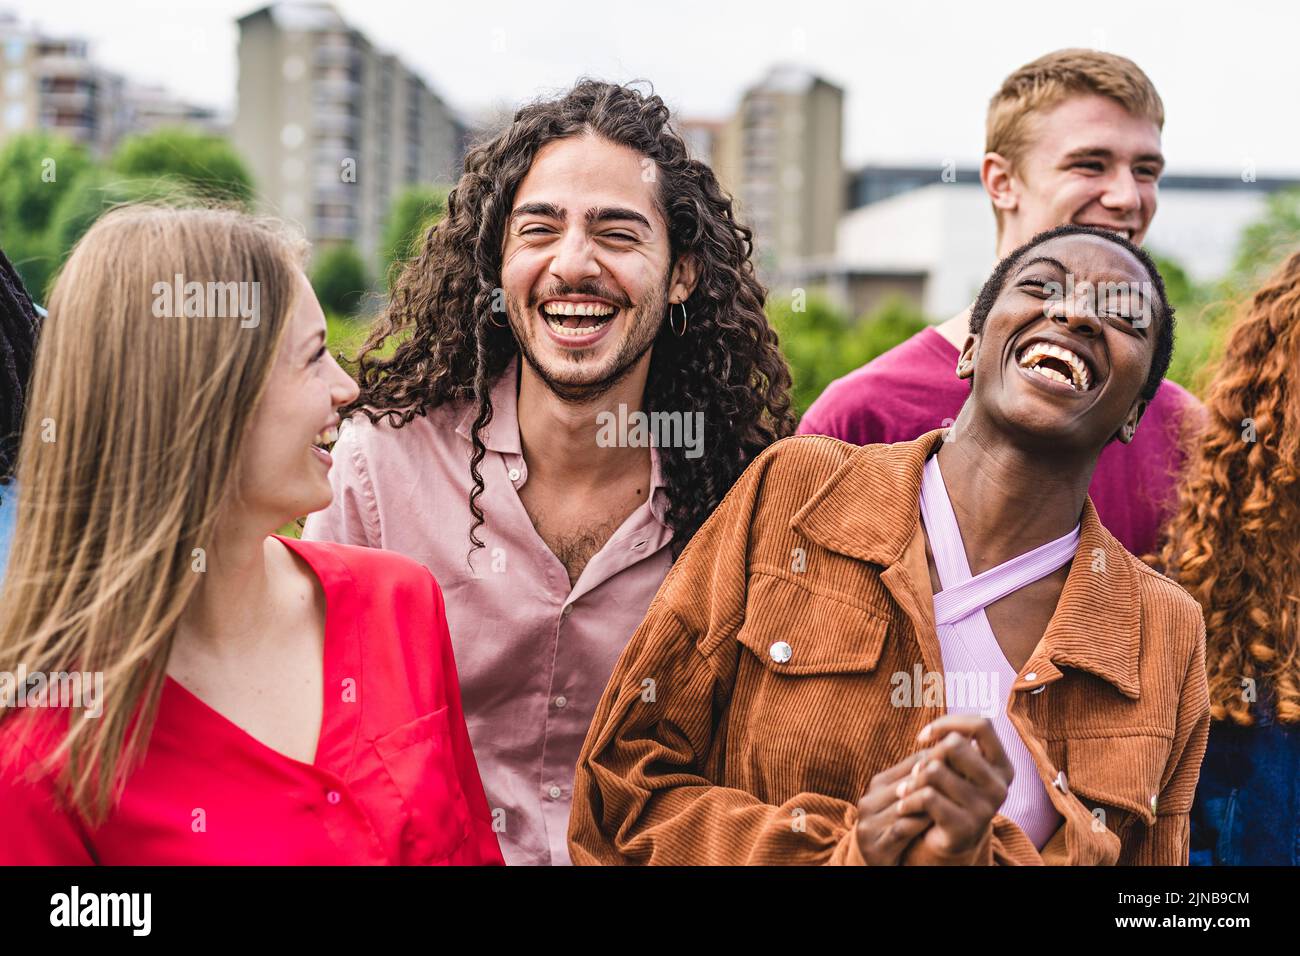 Multiethnic cheerful community of young friends gather outdoors and having fun laughing together - happy people lifestyle concept Stock Photo